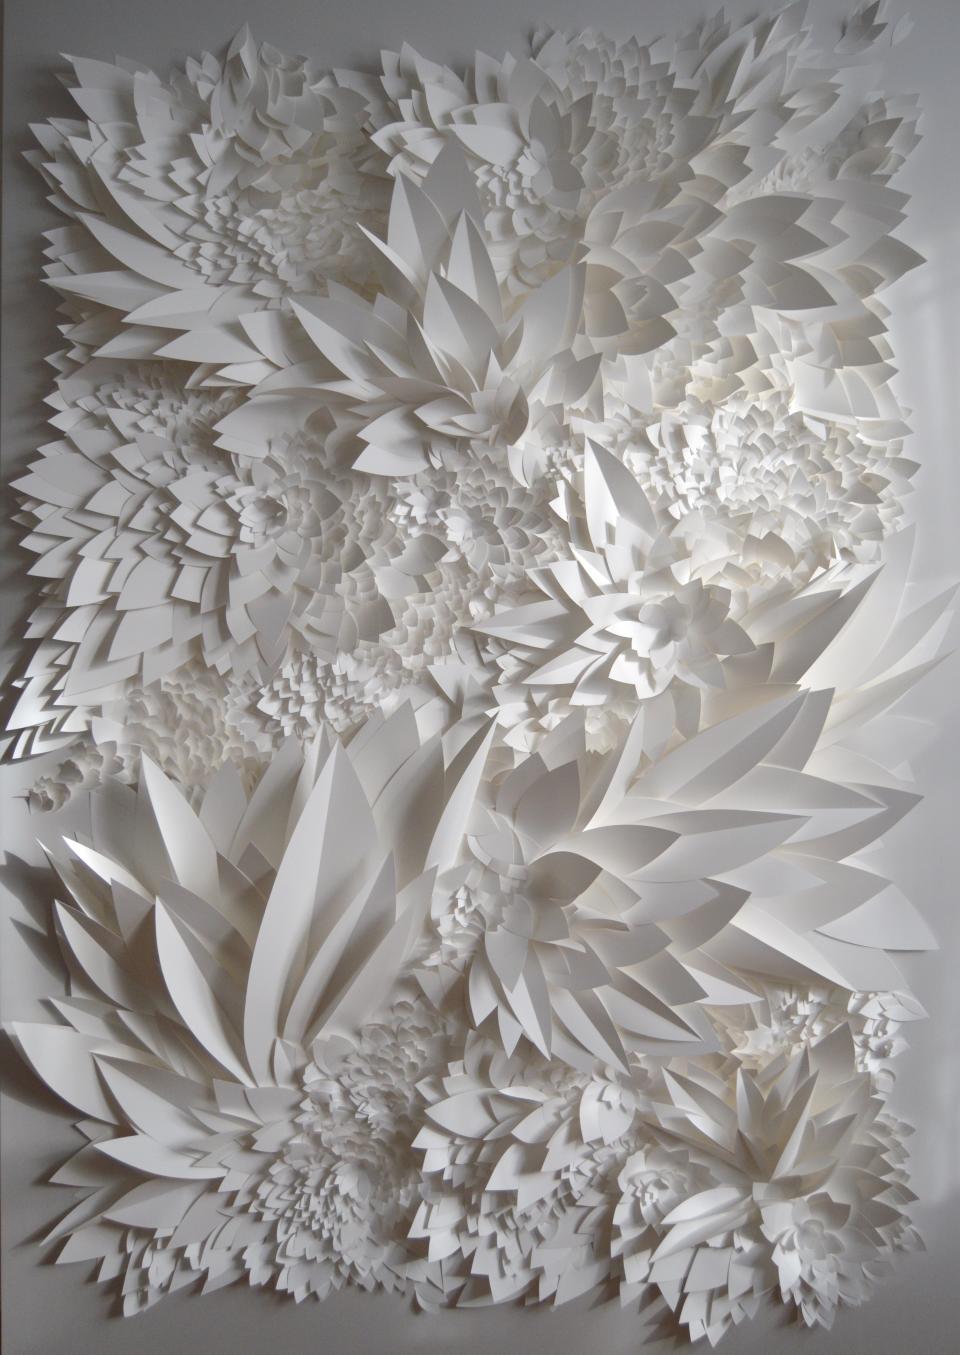 Julia Johnson's "Paradise," a creation of synthetic paper on a wood panel, will be featured by exhibitor Steidel Gallery at the Palm Beach Show, Feb. 15-20 at the Palm Beach County Convention Center.